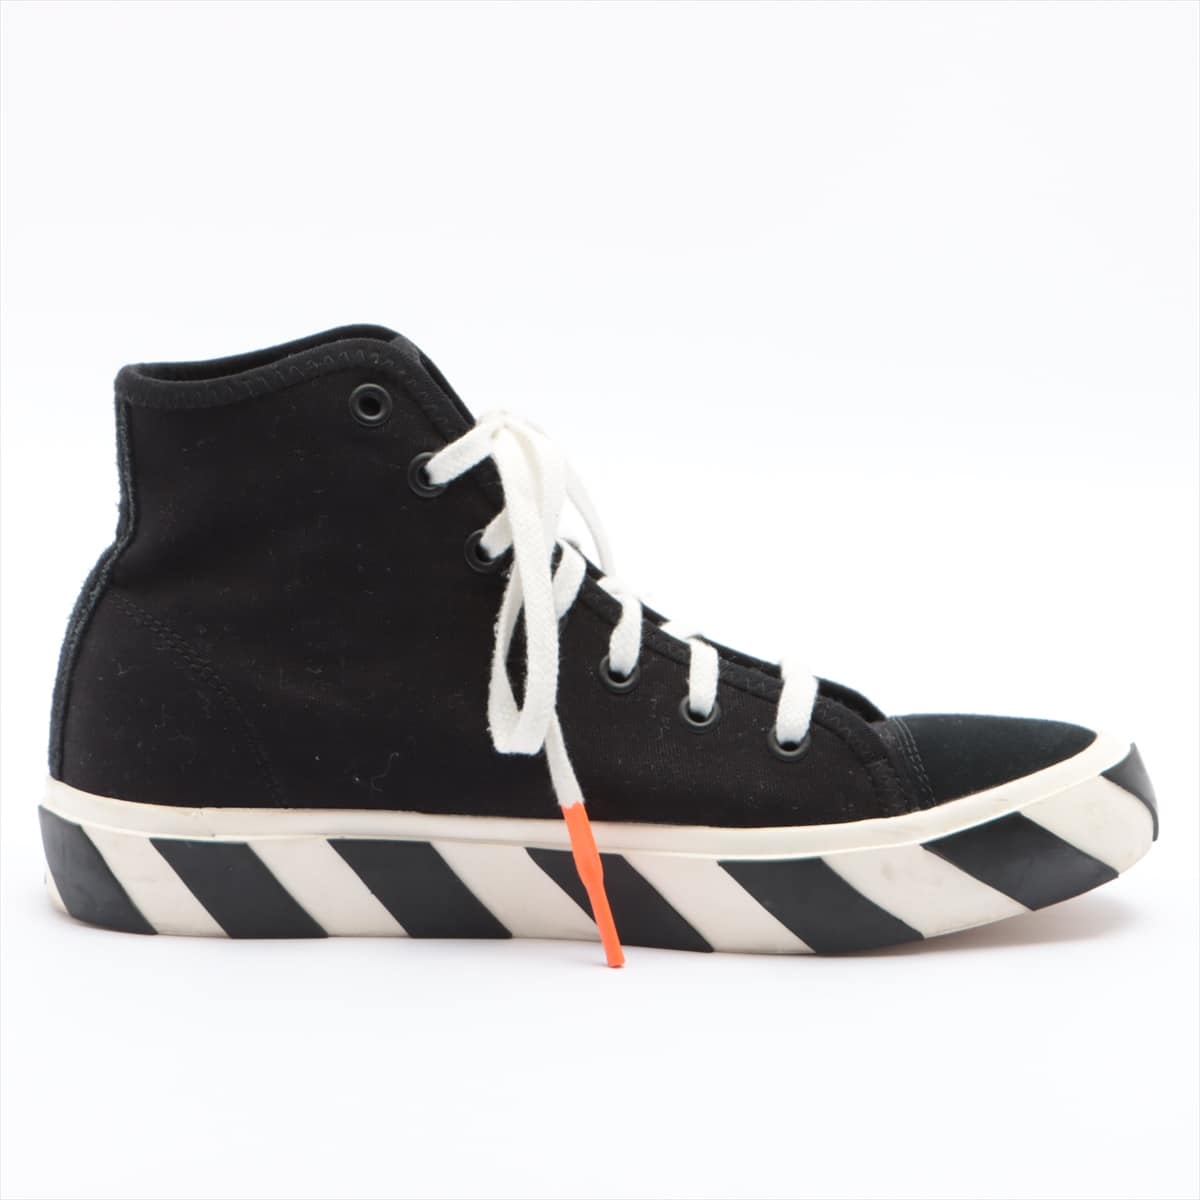 Off-White canvas High-top Sneakers 42 Men's Black